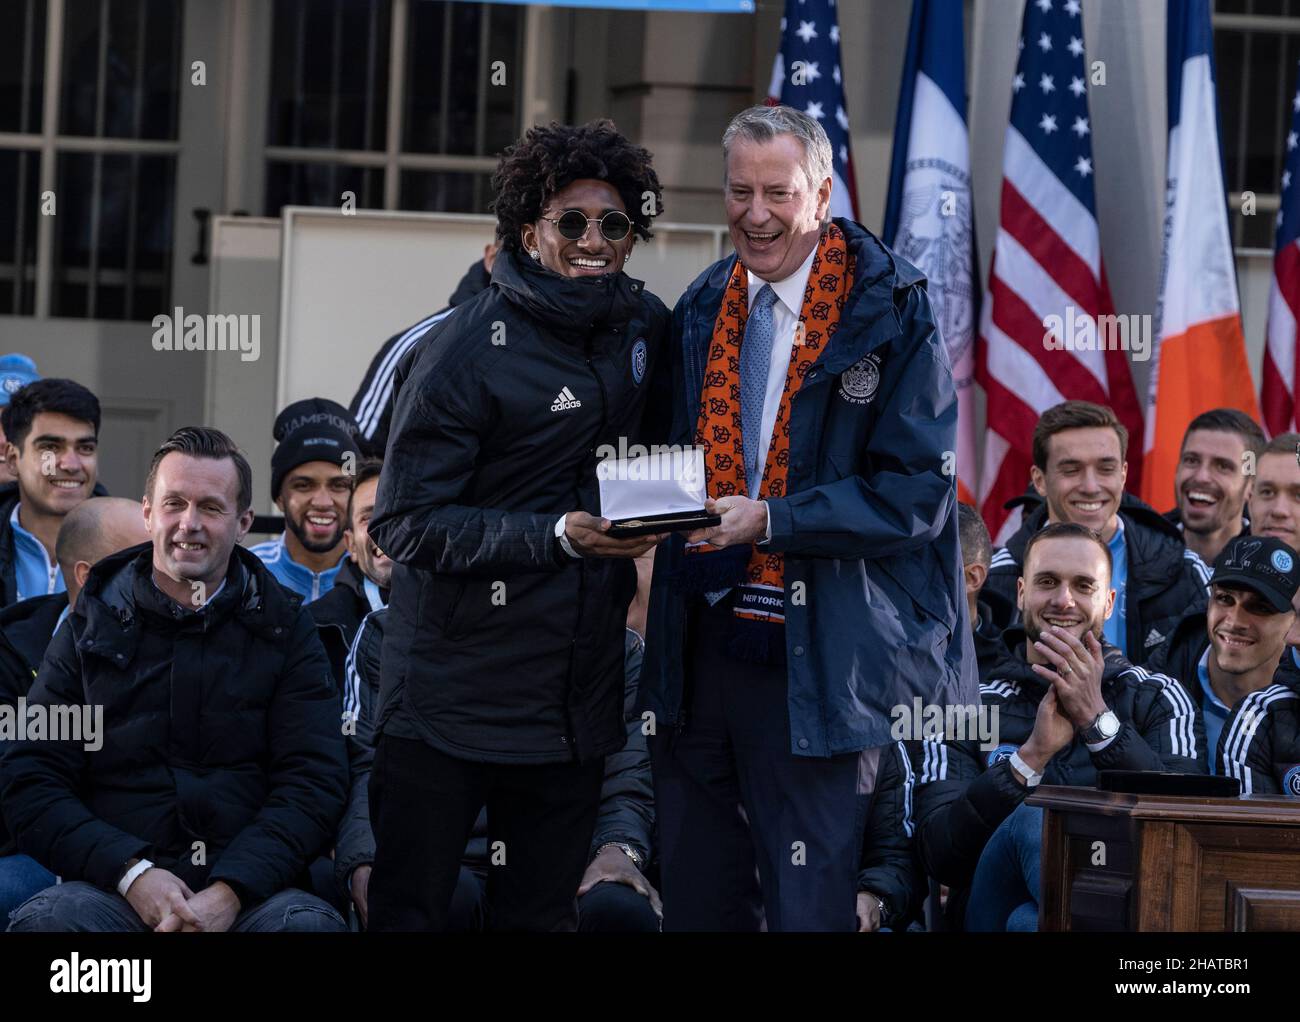 New York, NY - December 14, 2021: Forward Talles Magno received Keys to the City from mayor Bill de Blasio during celebration for NYCFC winning the 2021 MLS Cup on City Hall steps Stock Photo